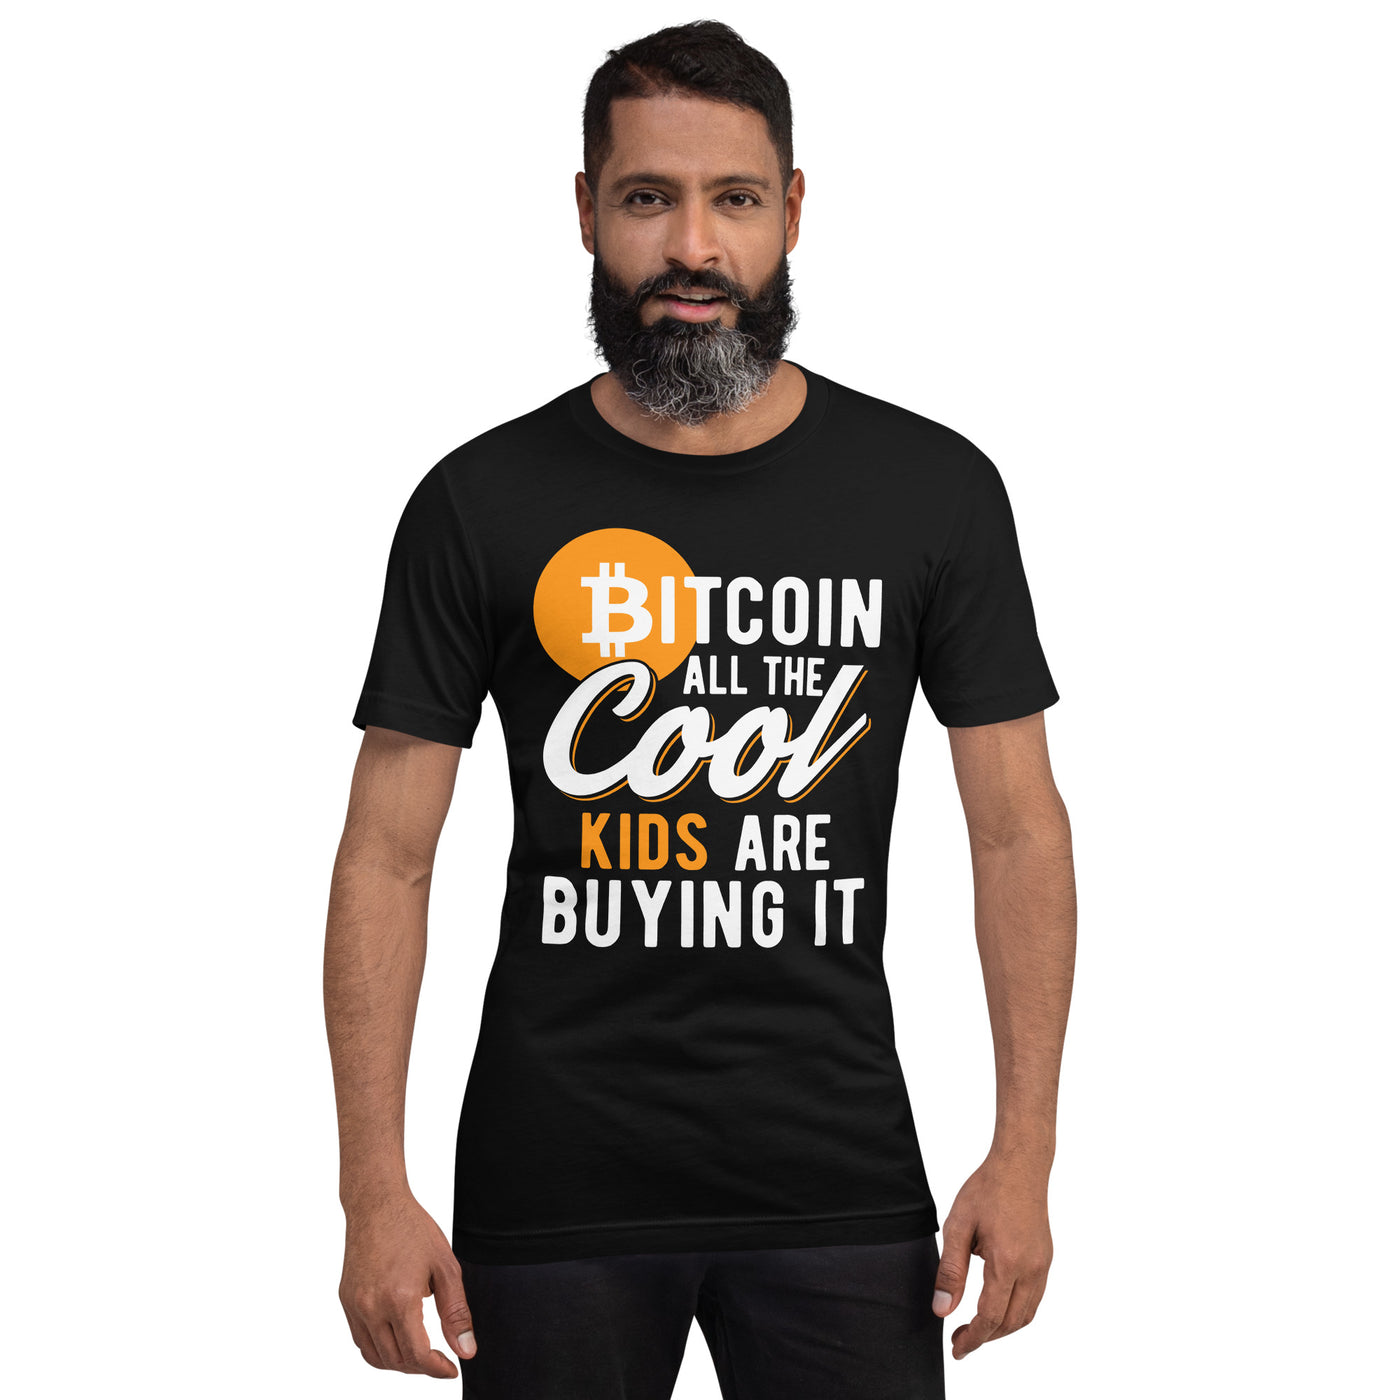 Bitcoin All the cool kids are buying it Unisex t-shirt